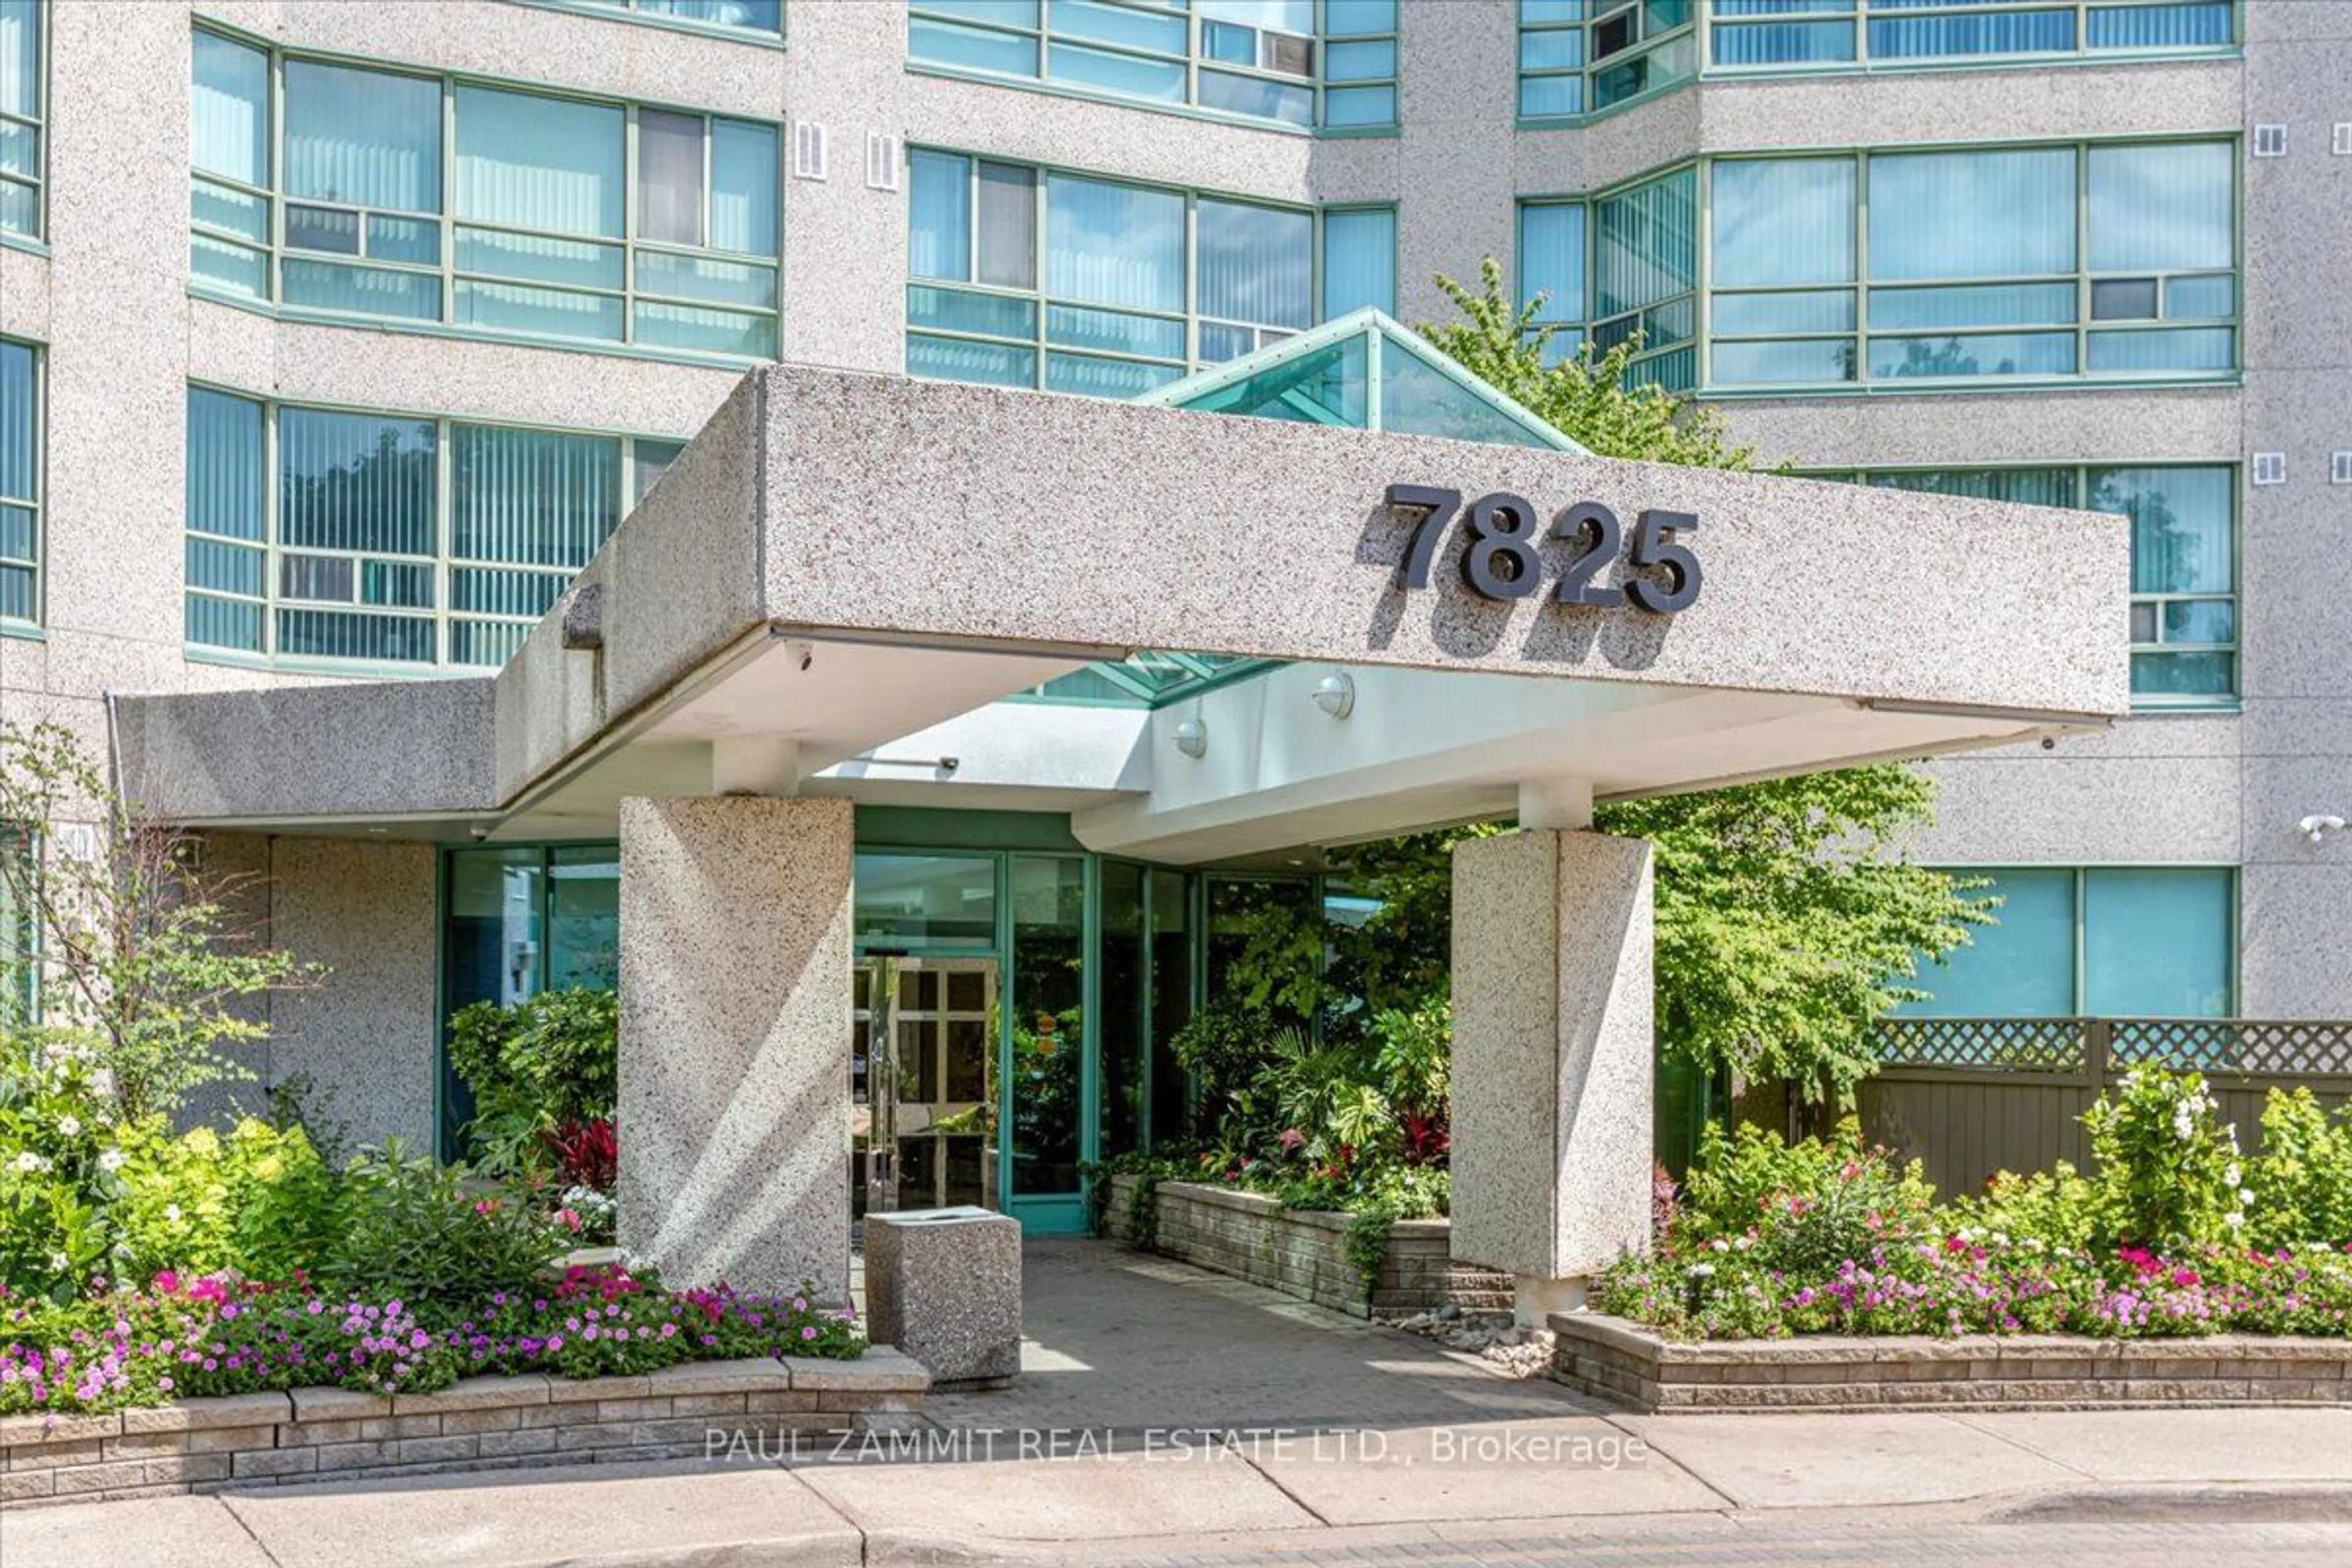 A pic from exterior of the house or condo for 7825 Bayview Ave #826, Markham Ontario L3T 7N2